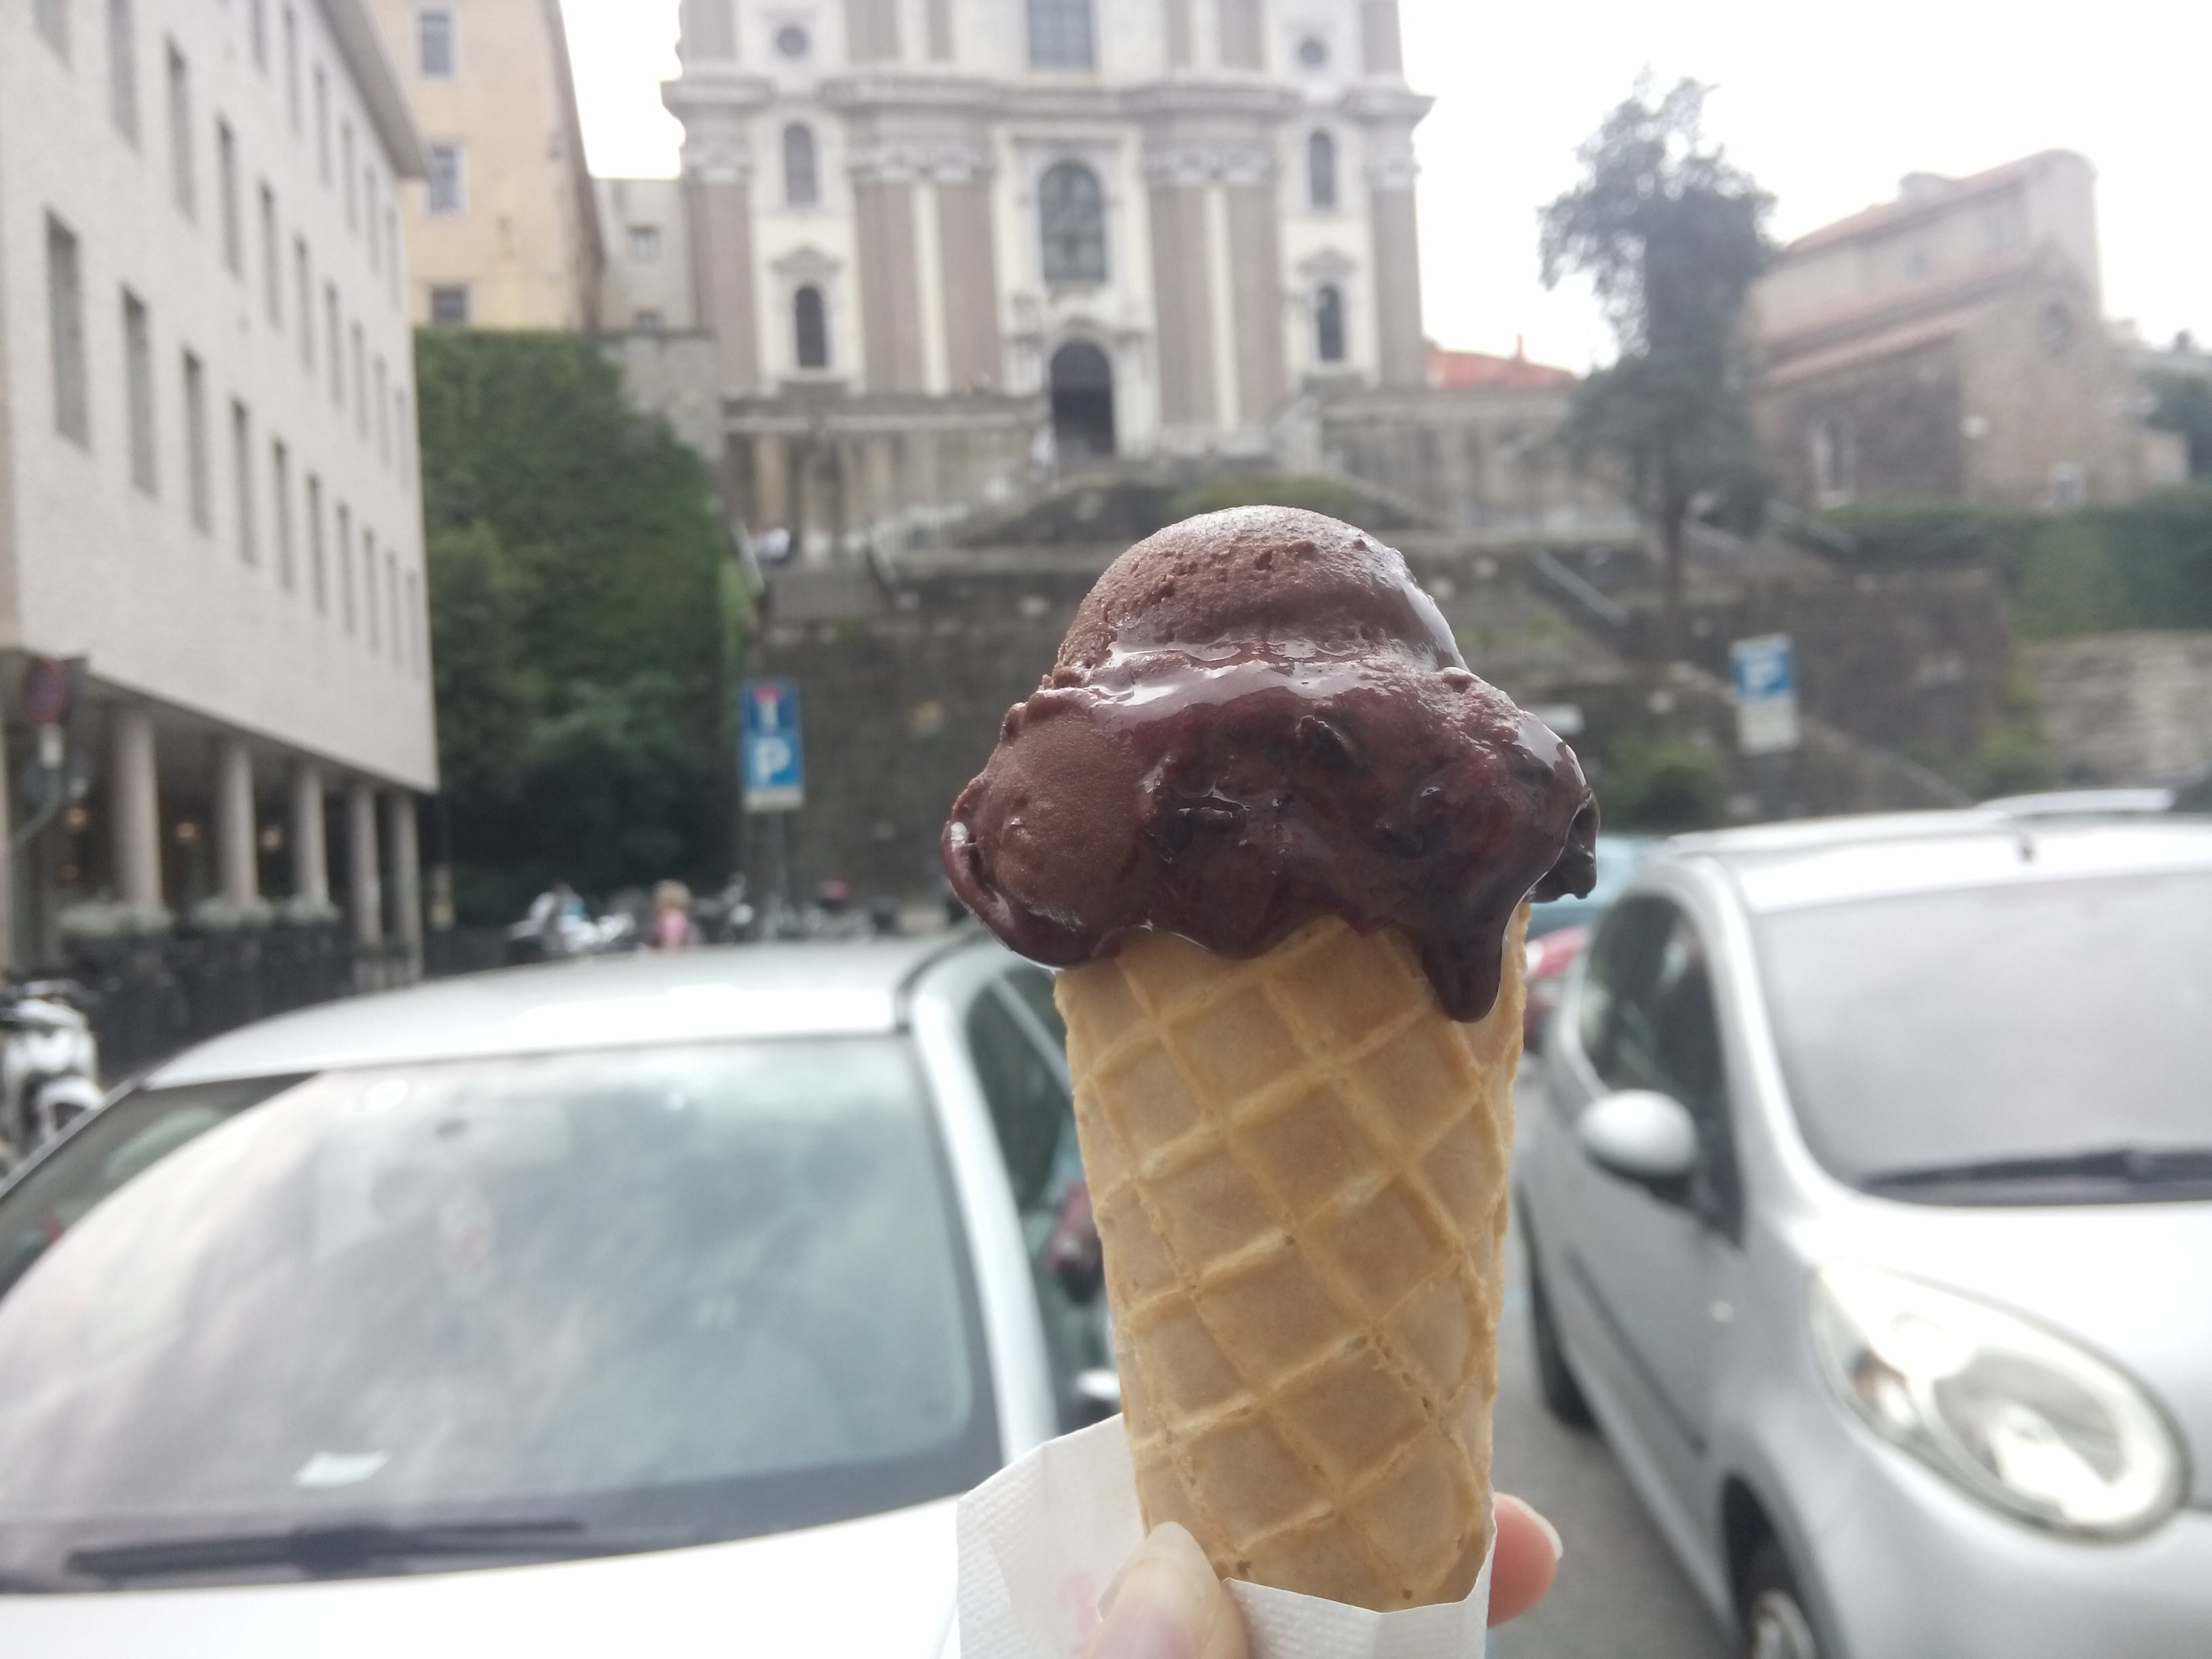 Chocolate ice cream in a cone in the foreground, with cars and a historical building in the background